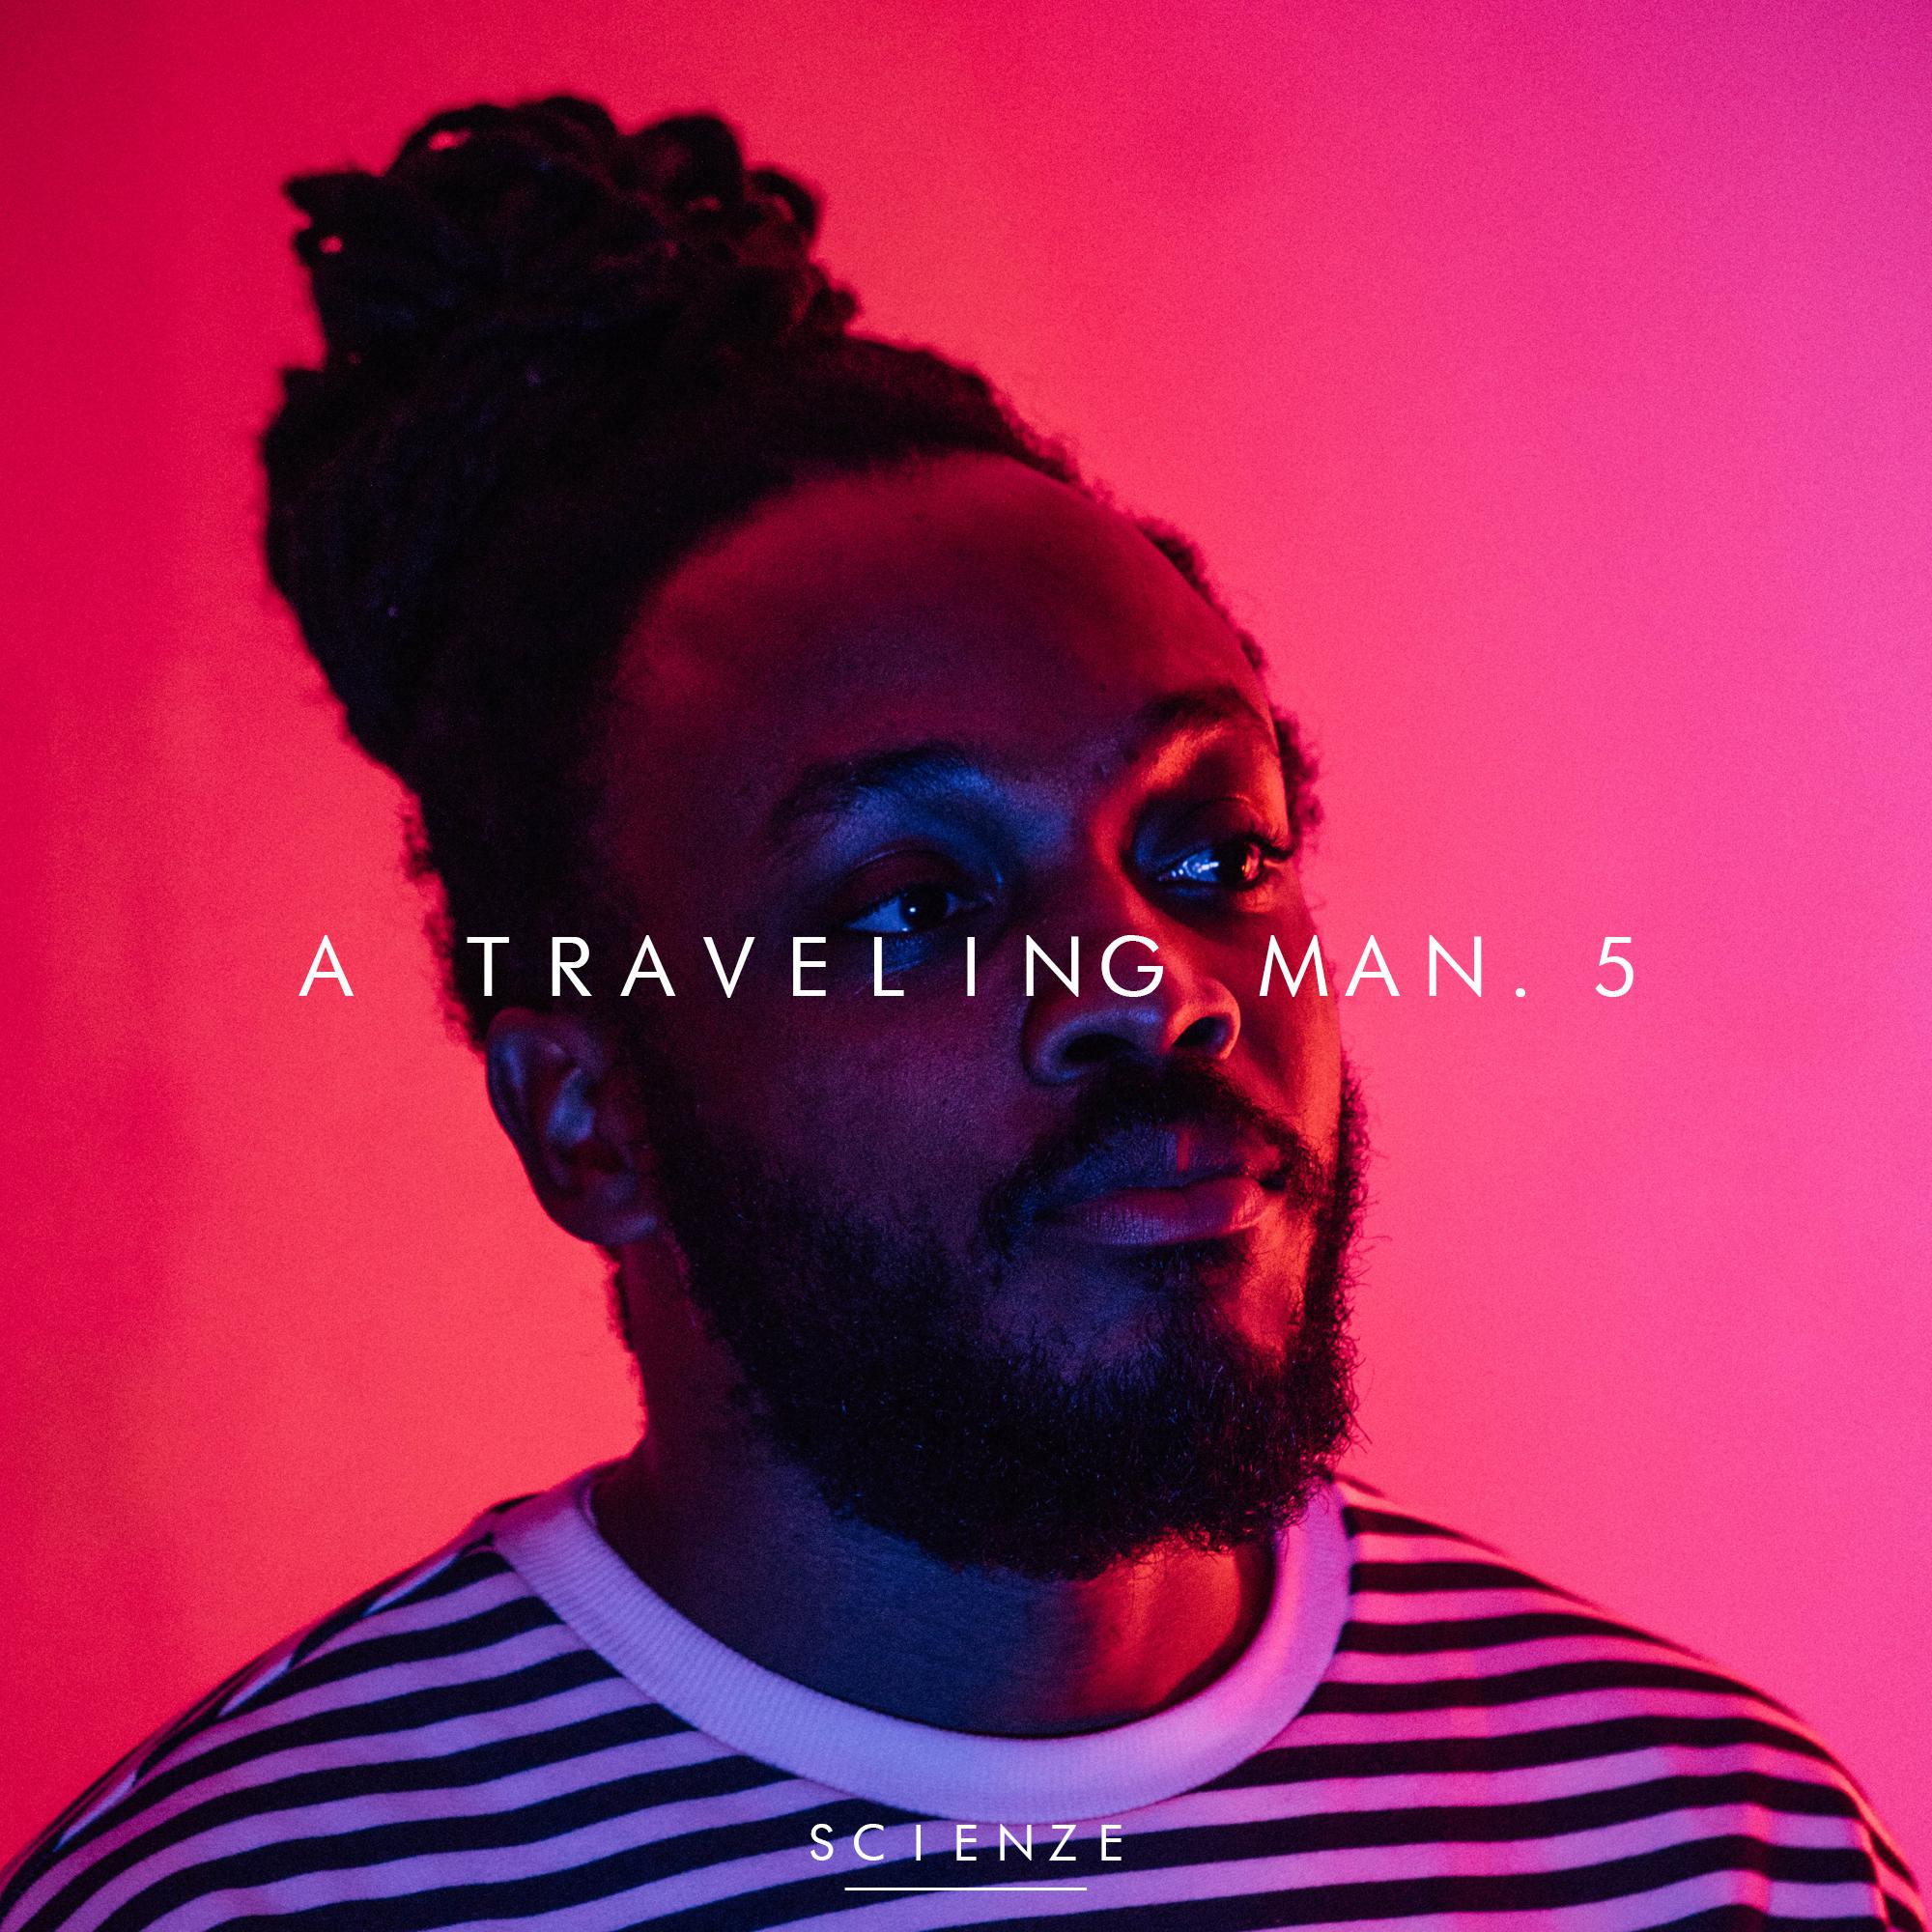 A Traveling Man. 5